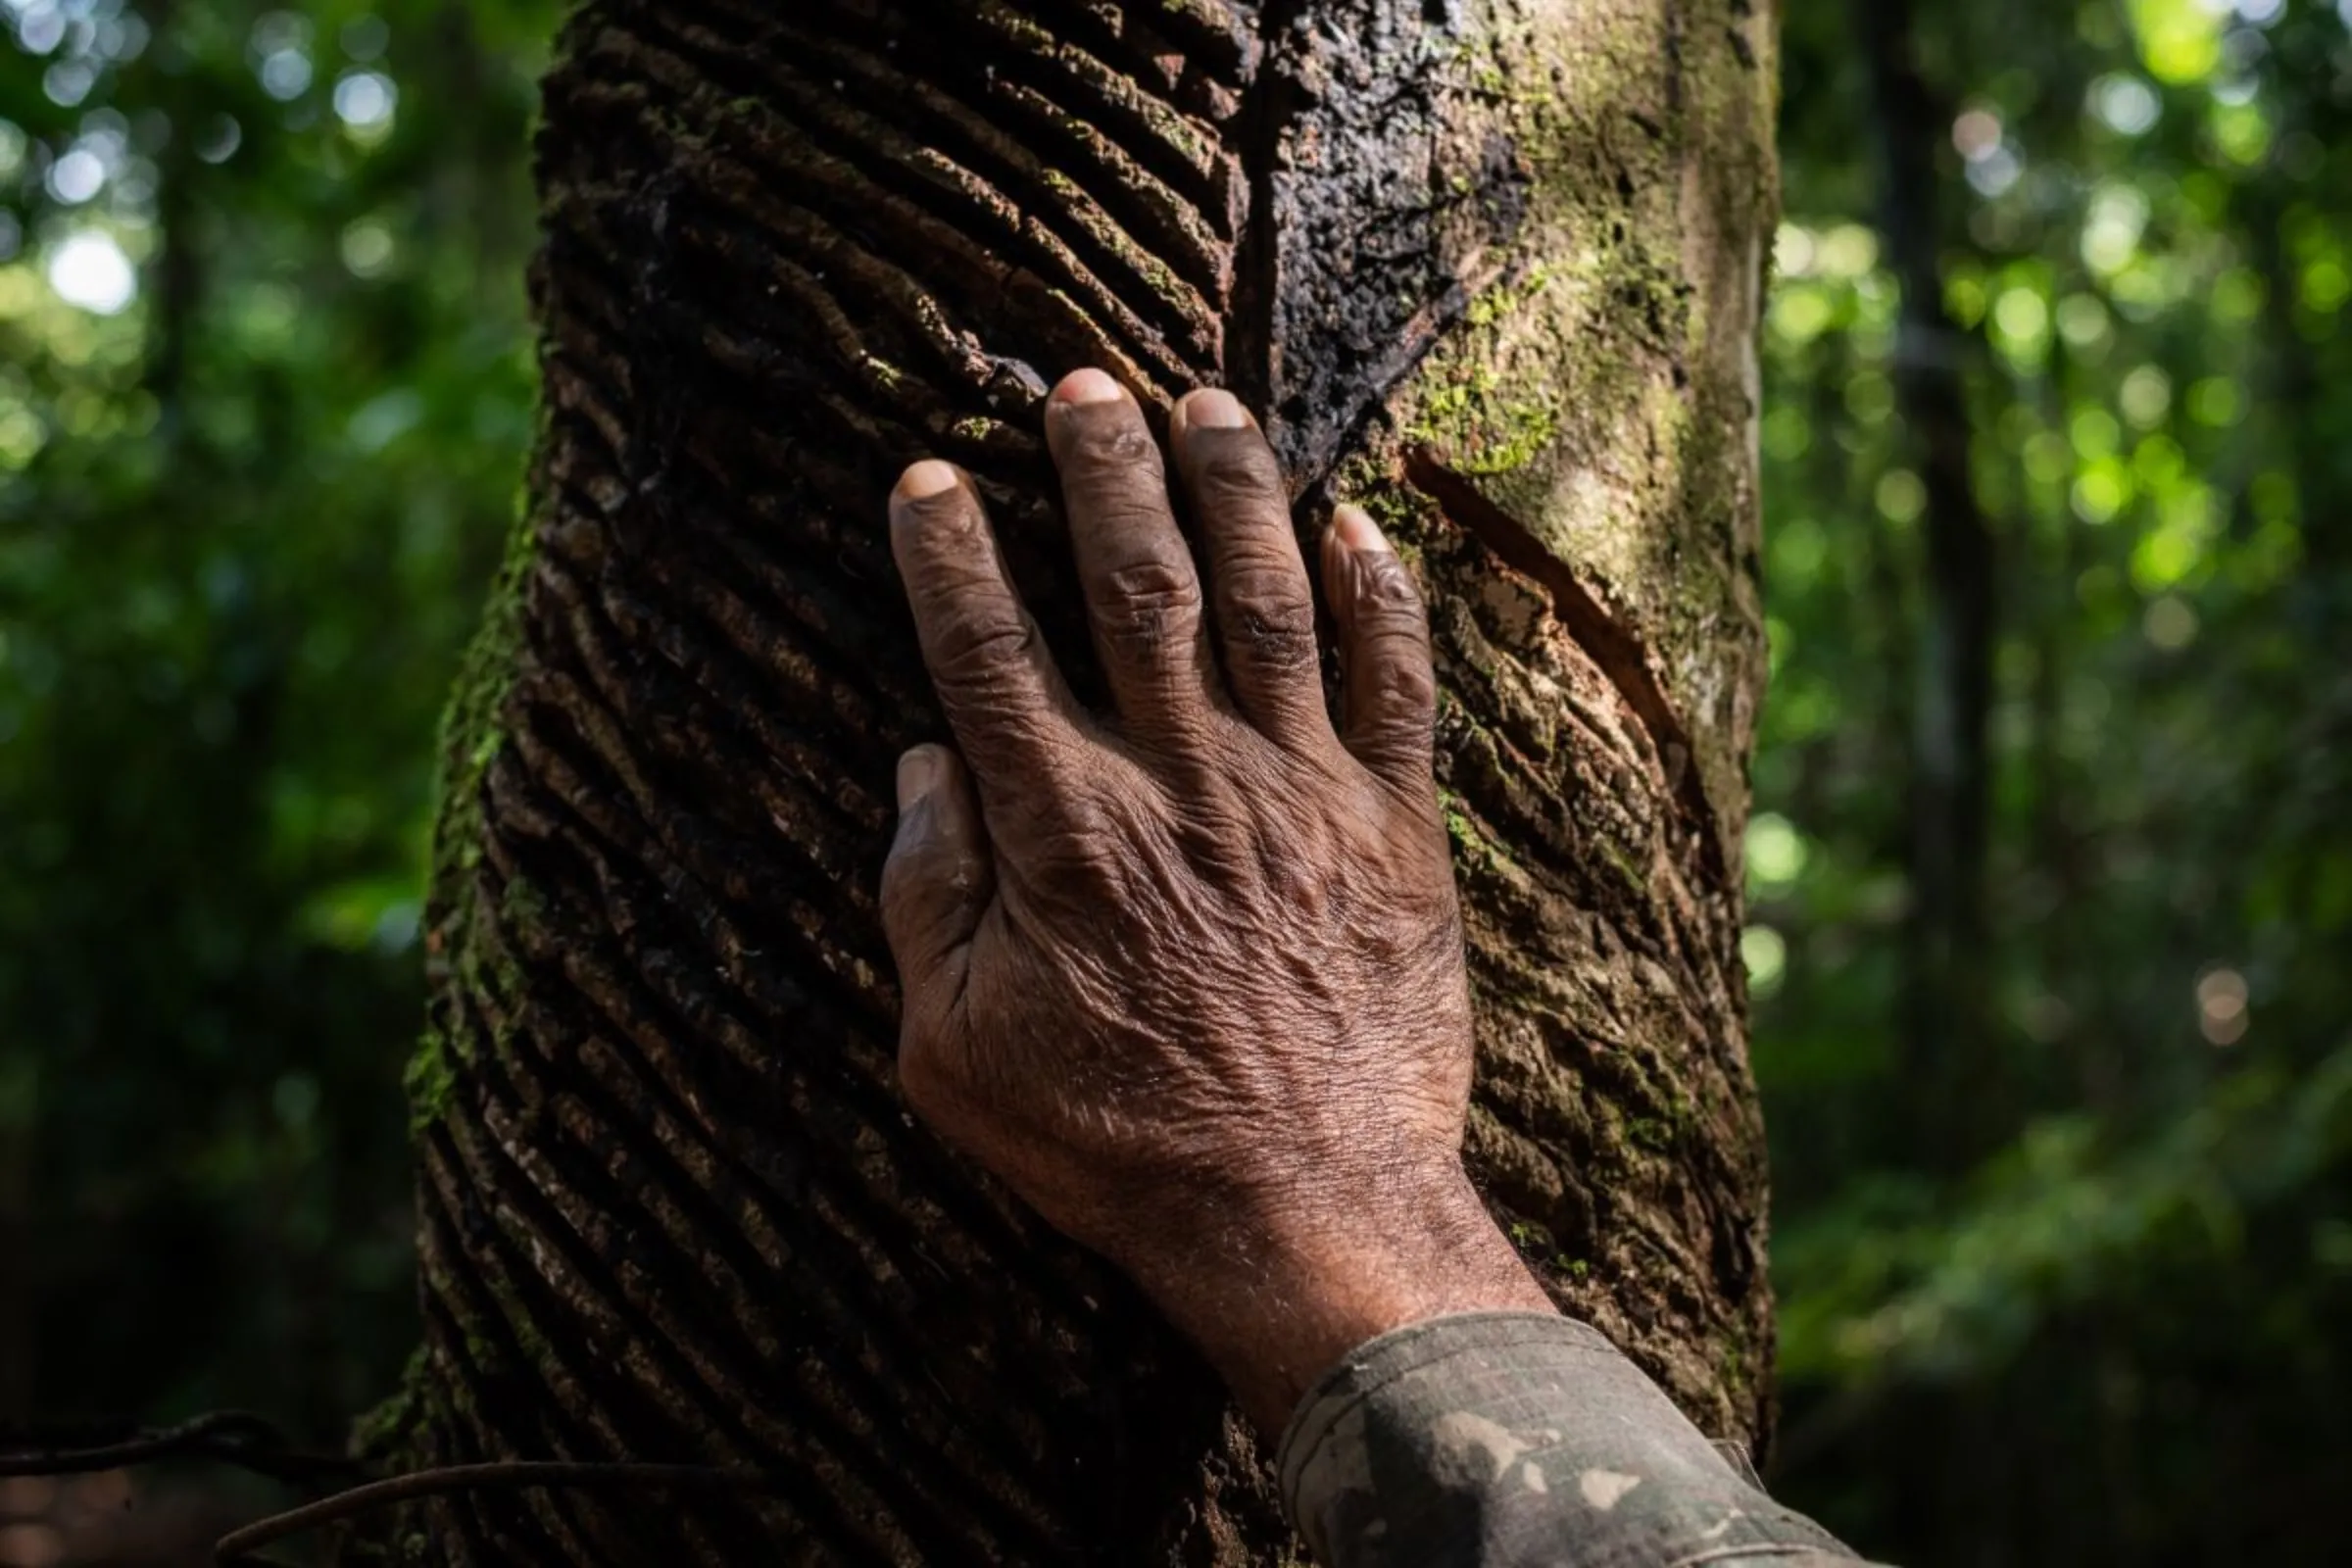 Manoel Magno runs his hands over a rubber tree in the jungle in Pará, Brazil, January 17, 2023. Thomson Reuters Foundation/Cícero Pedrosa Neto